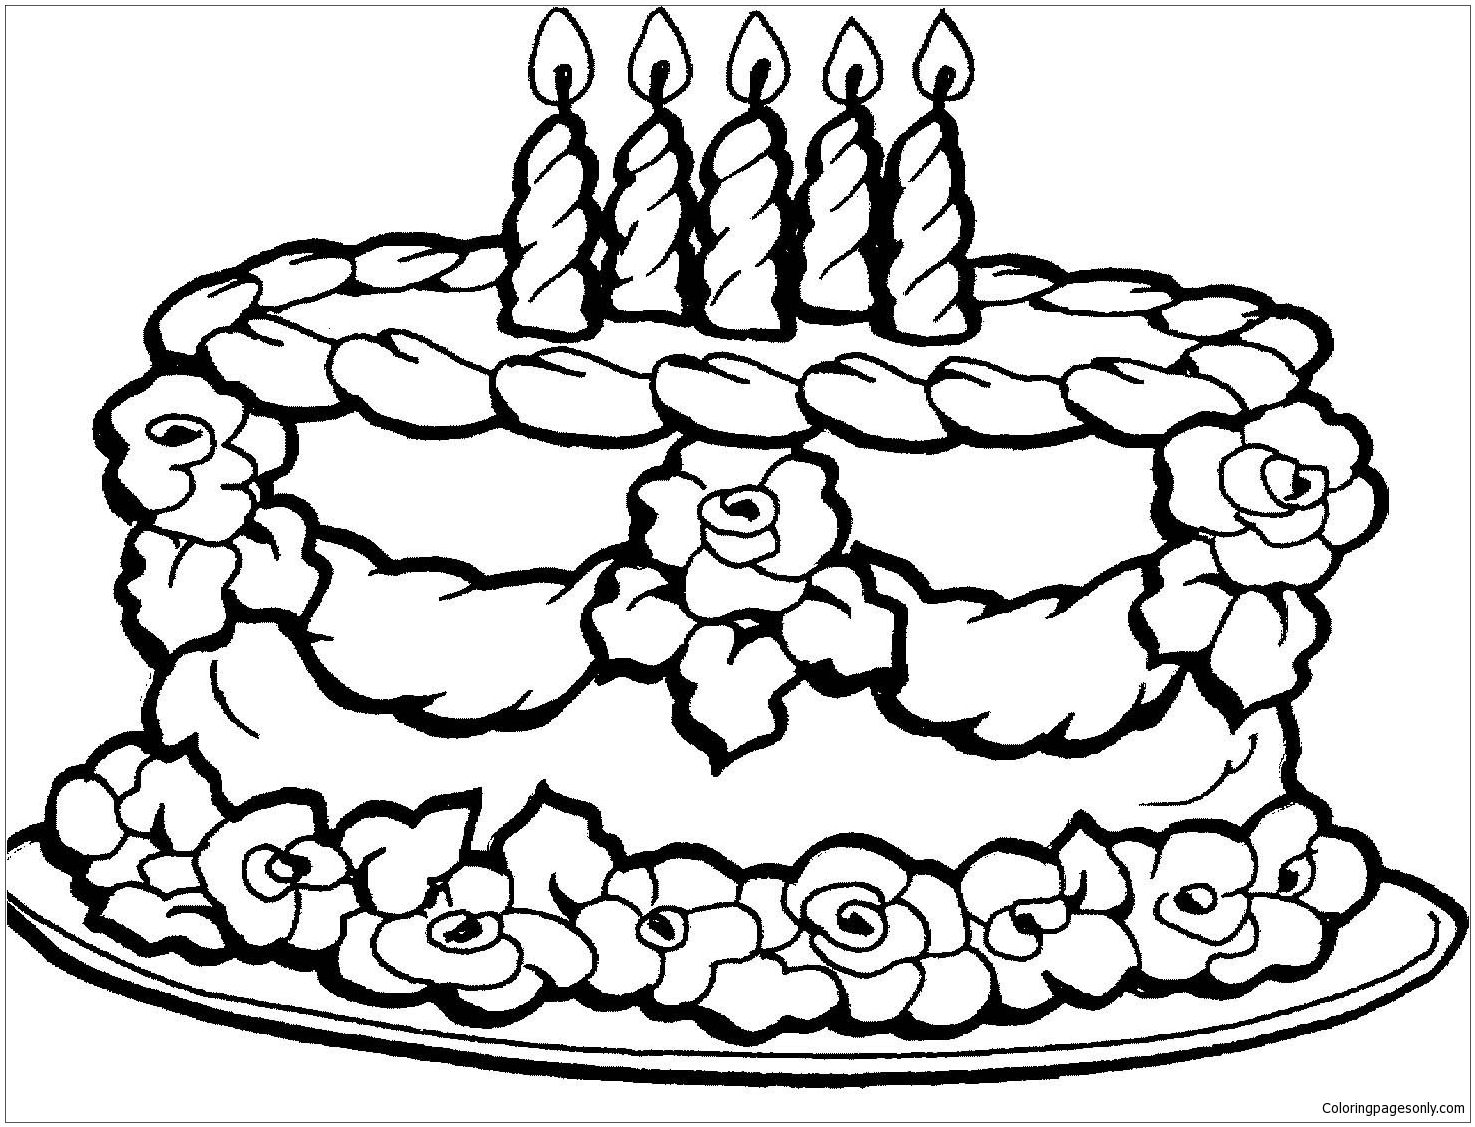 Shopkins Queenie Cake Coloring Pages